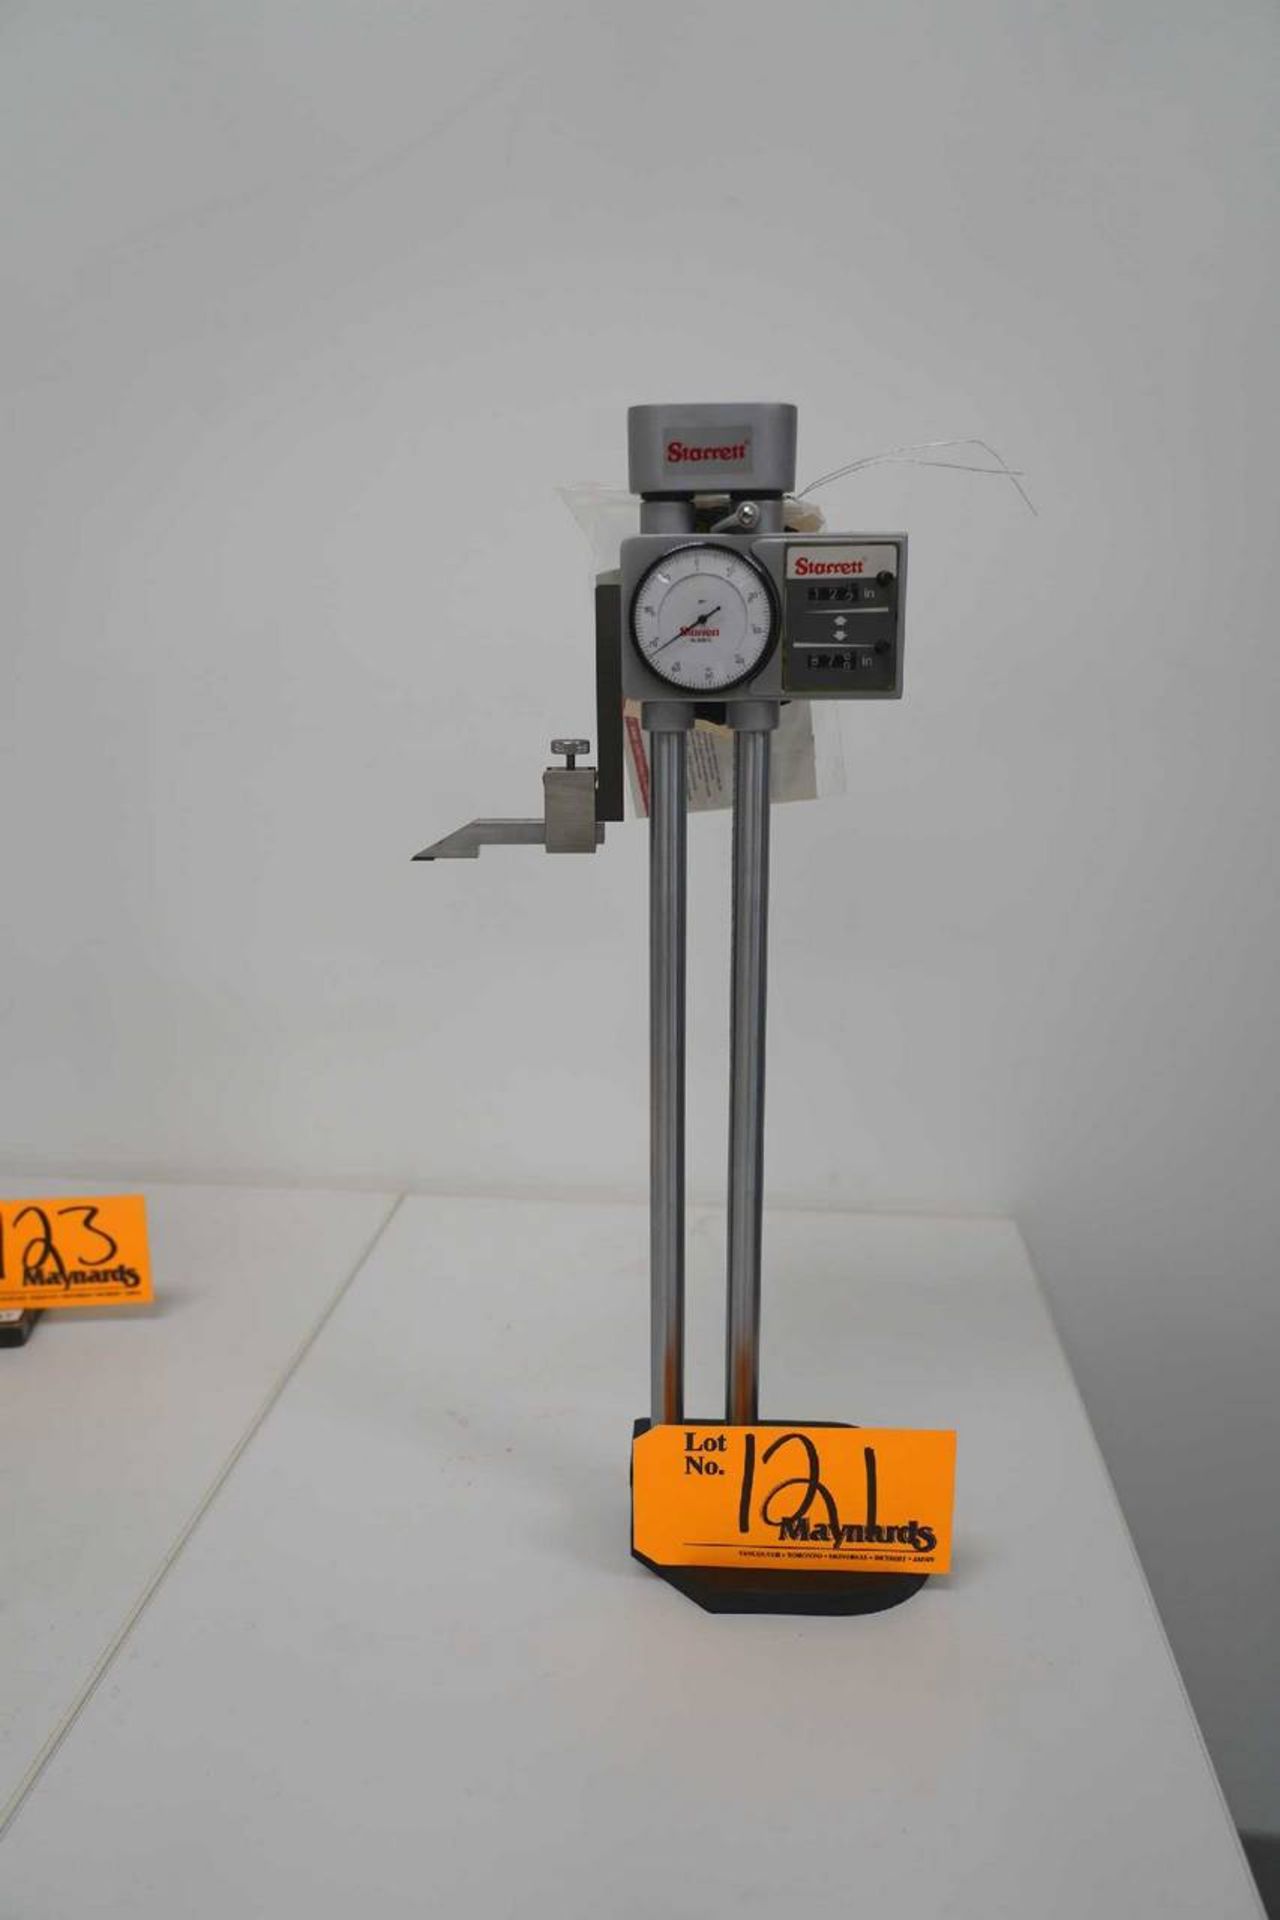 Starrett 1305408 12'' Dial Height Gauge With Digital Counter - Image 2 of 2